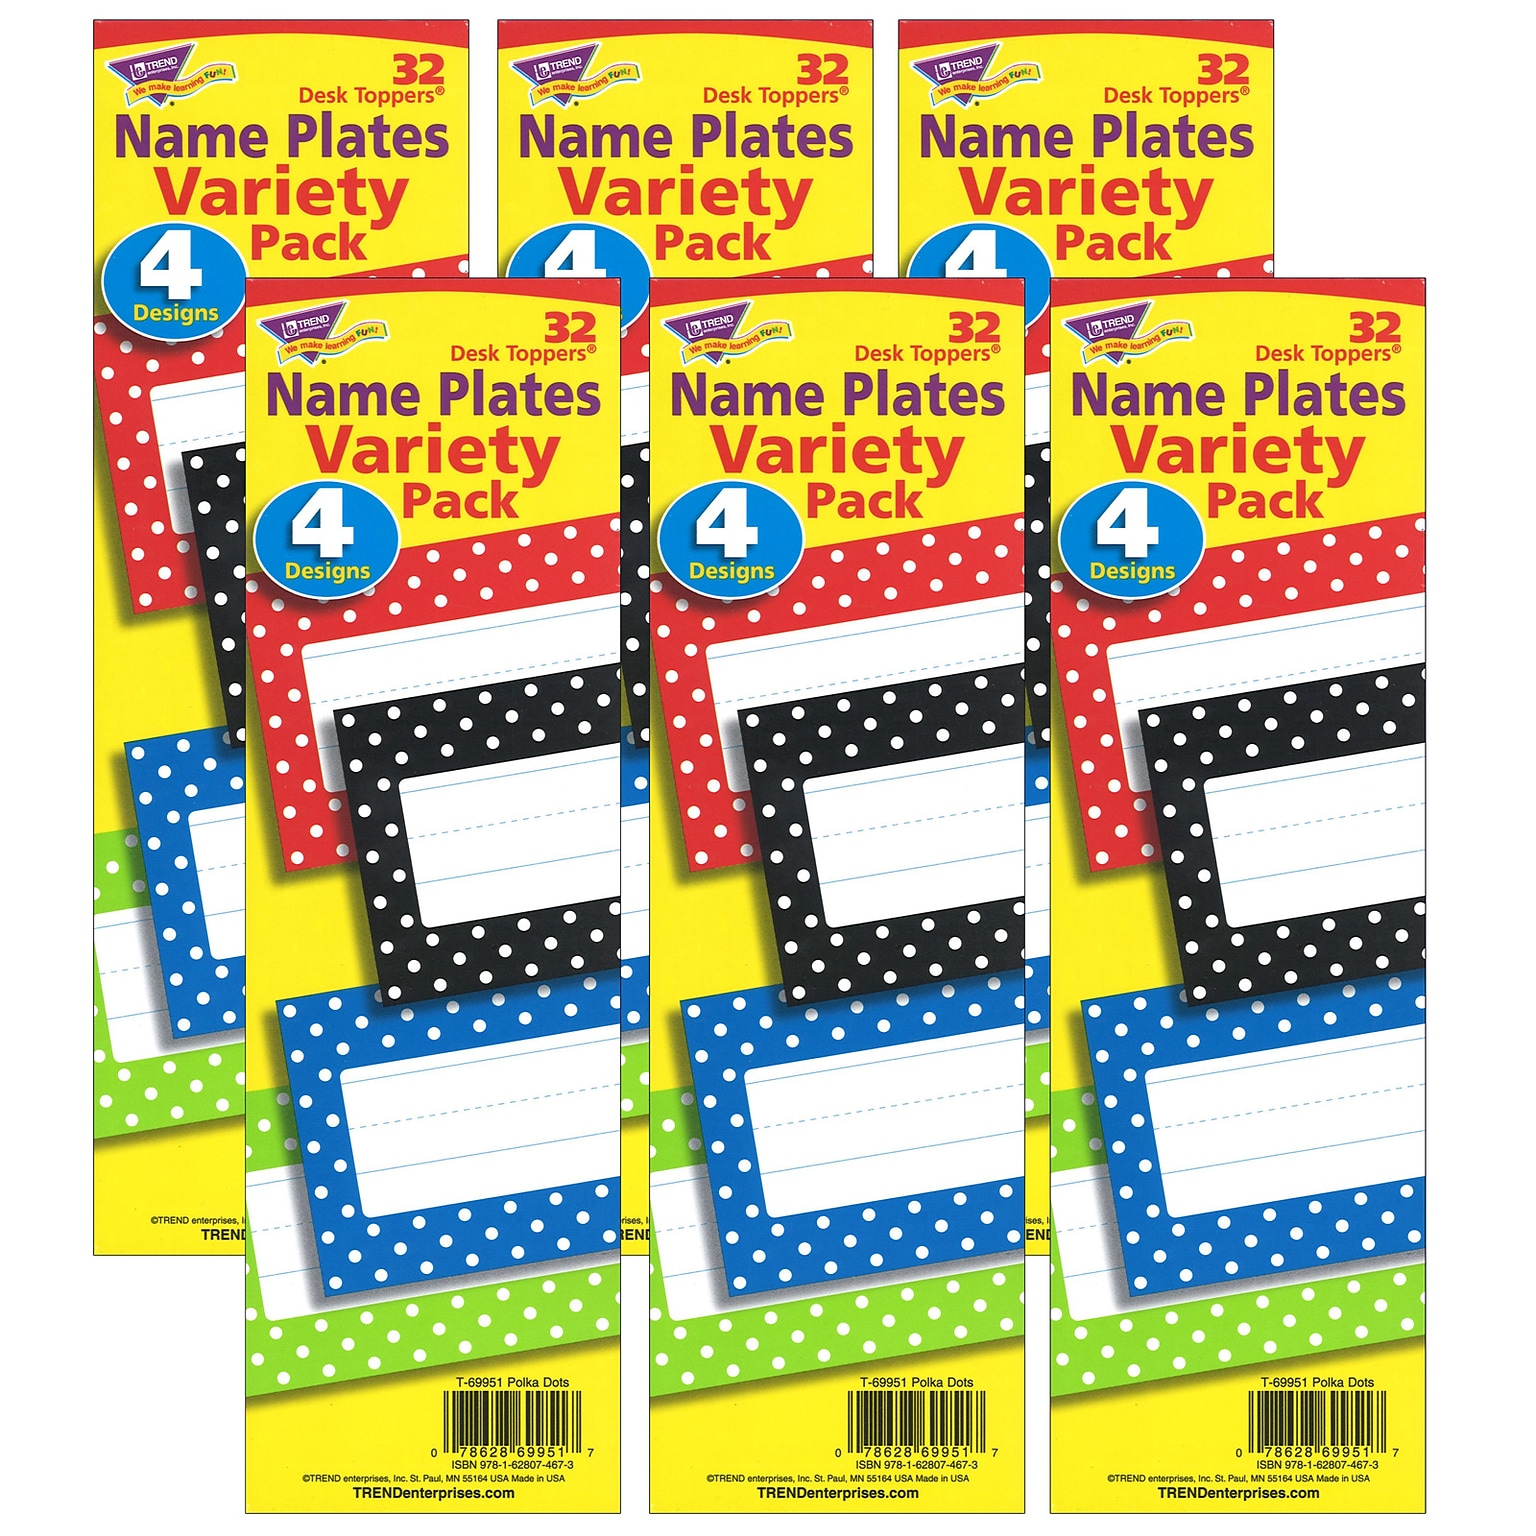 TREND Polka Dots Desk Toppers® Nameplates Variety Pack, 2.875 x 9.5, 32 Per Pack, 6 Packs (T-69951-6)